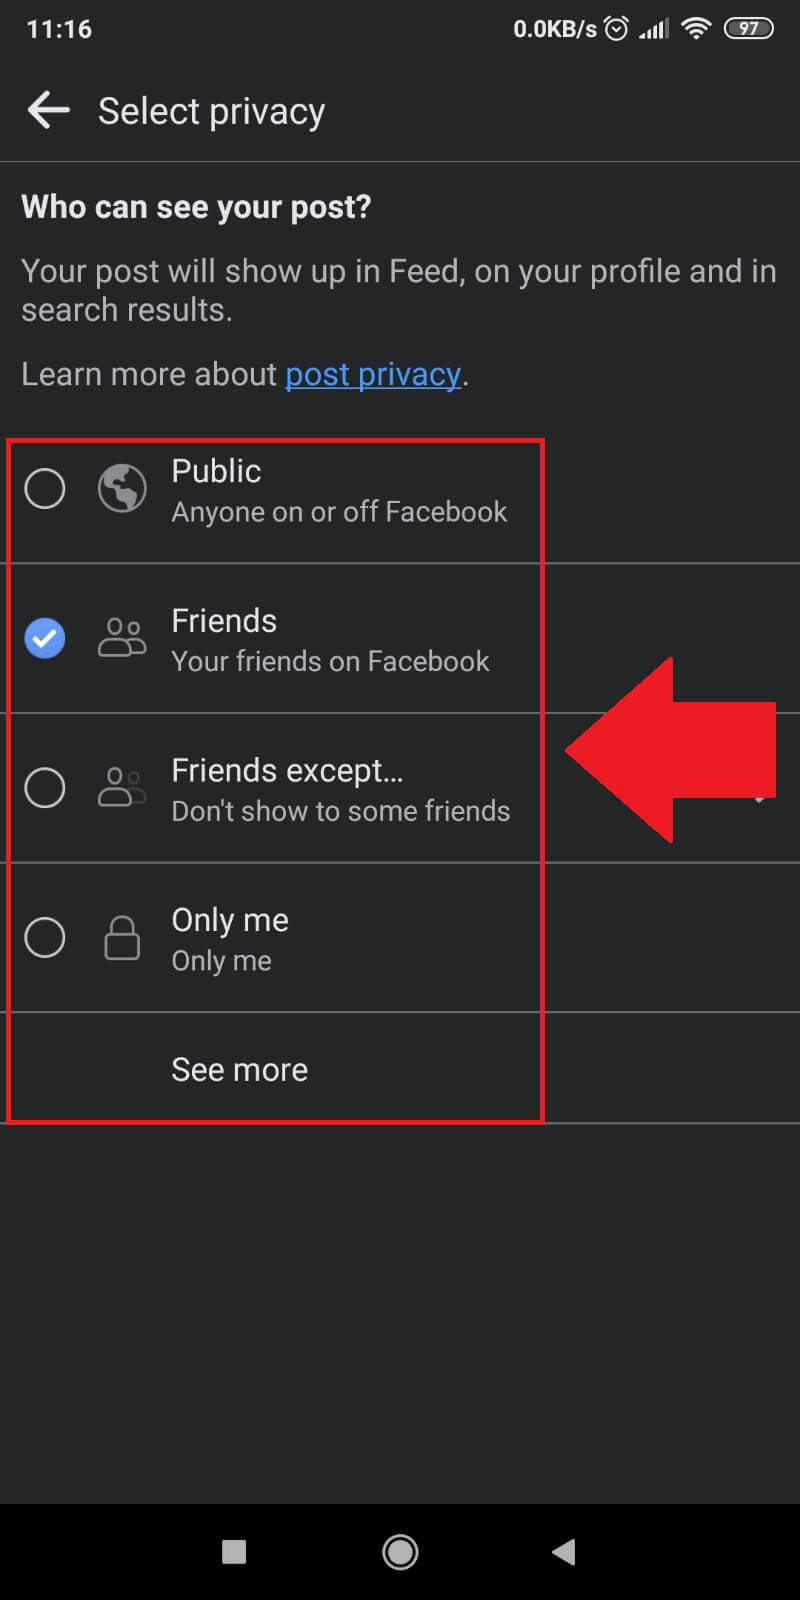 Does Facebook Notify Someone When You Save a Photo?